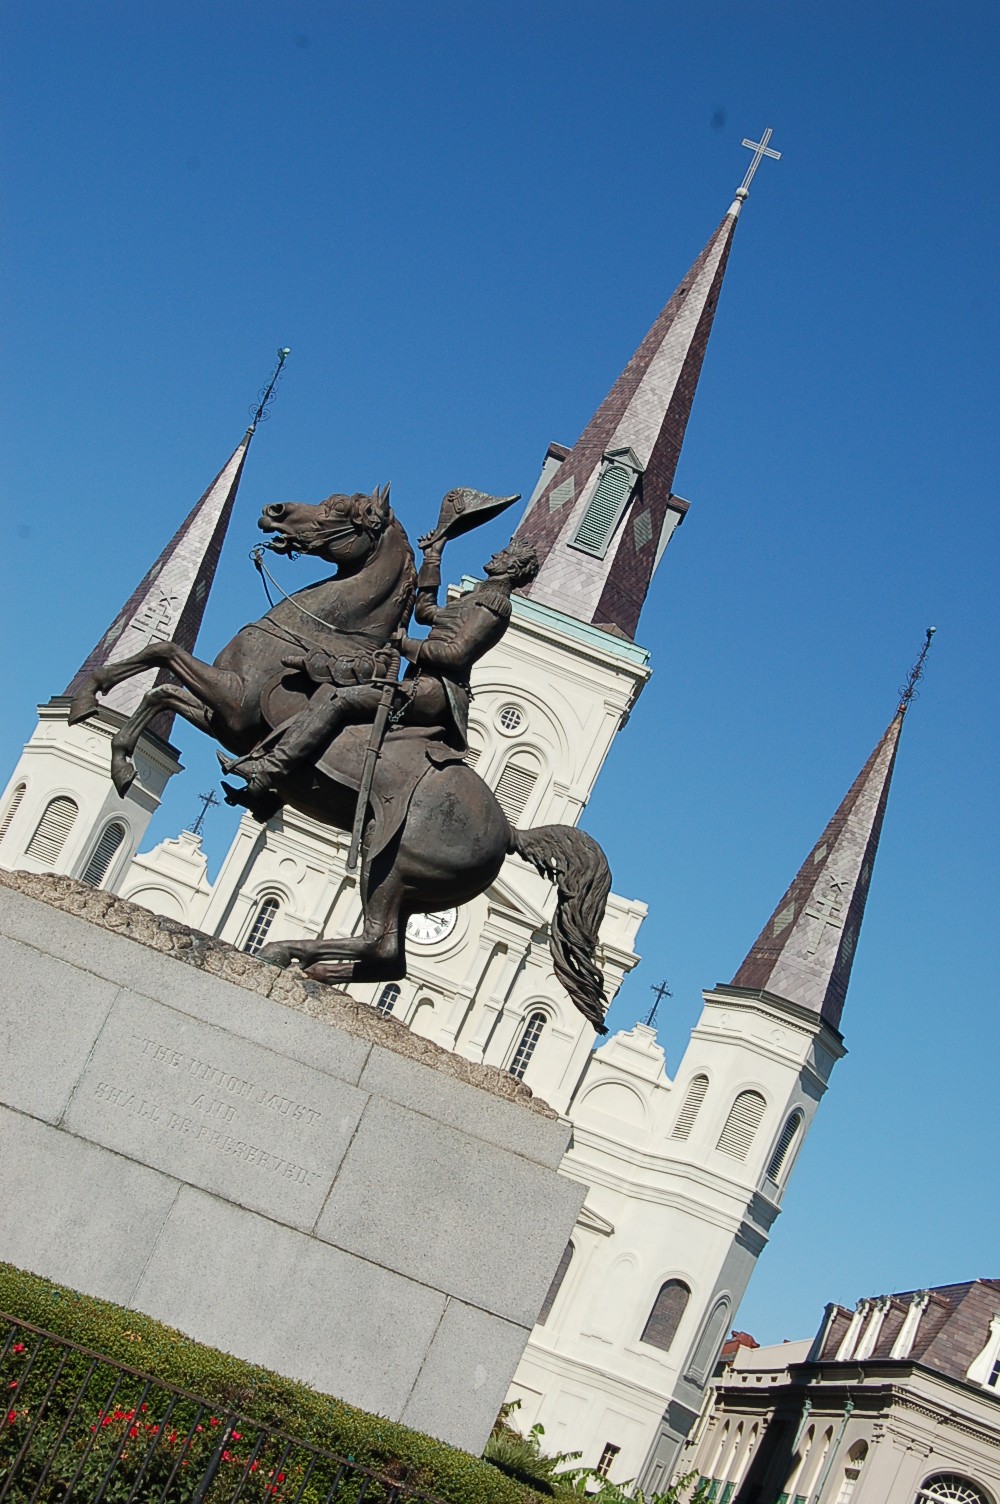 Saint Louis Cathedral in New Orleans